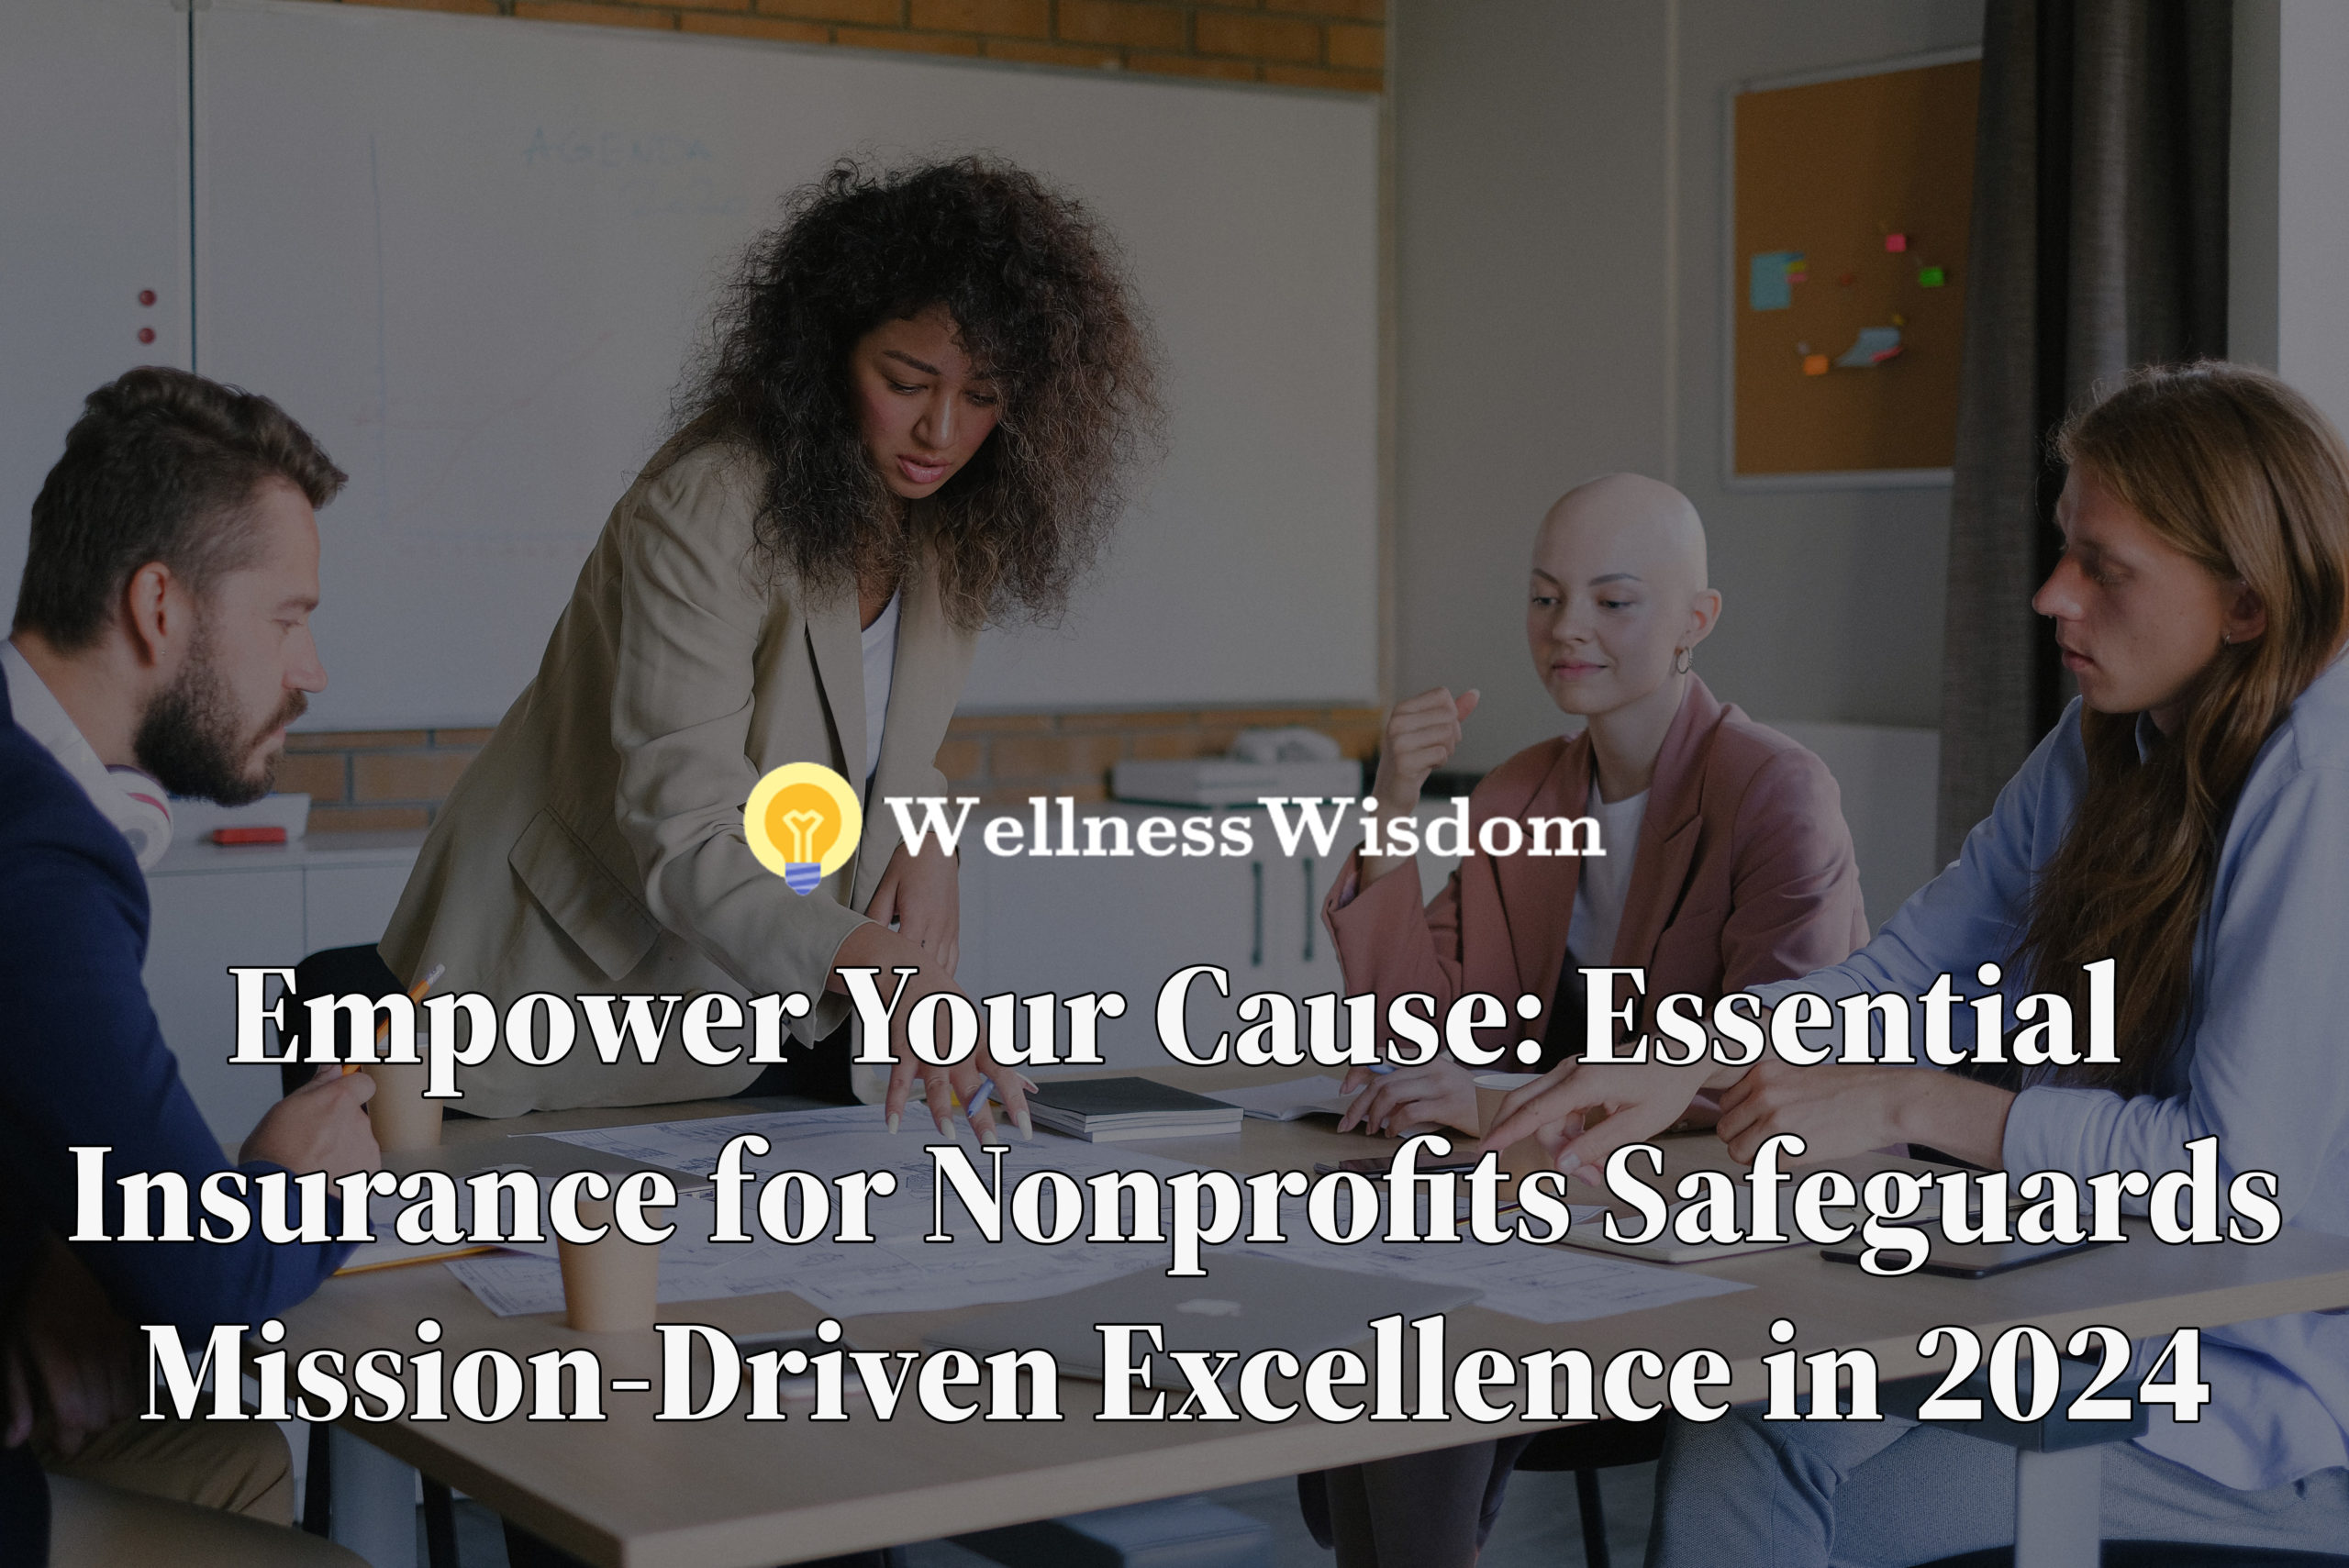 Nonprofit insurance, Mission-driven organizations, Insurance coverage, Liability insurance, Property insurance, Directors and officers insurance (D&O insurance), Risk management, Nonprofit sector, Social impact, Financial protection, Operational continuity, Legal protection, Insurance solutions, Nonprofit resources, Social responsibility